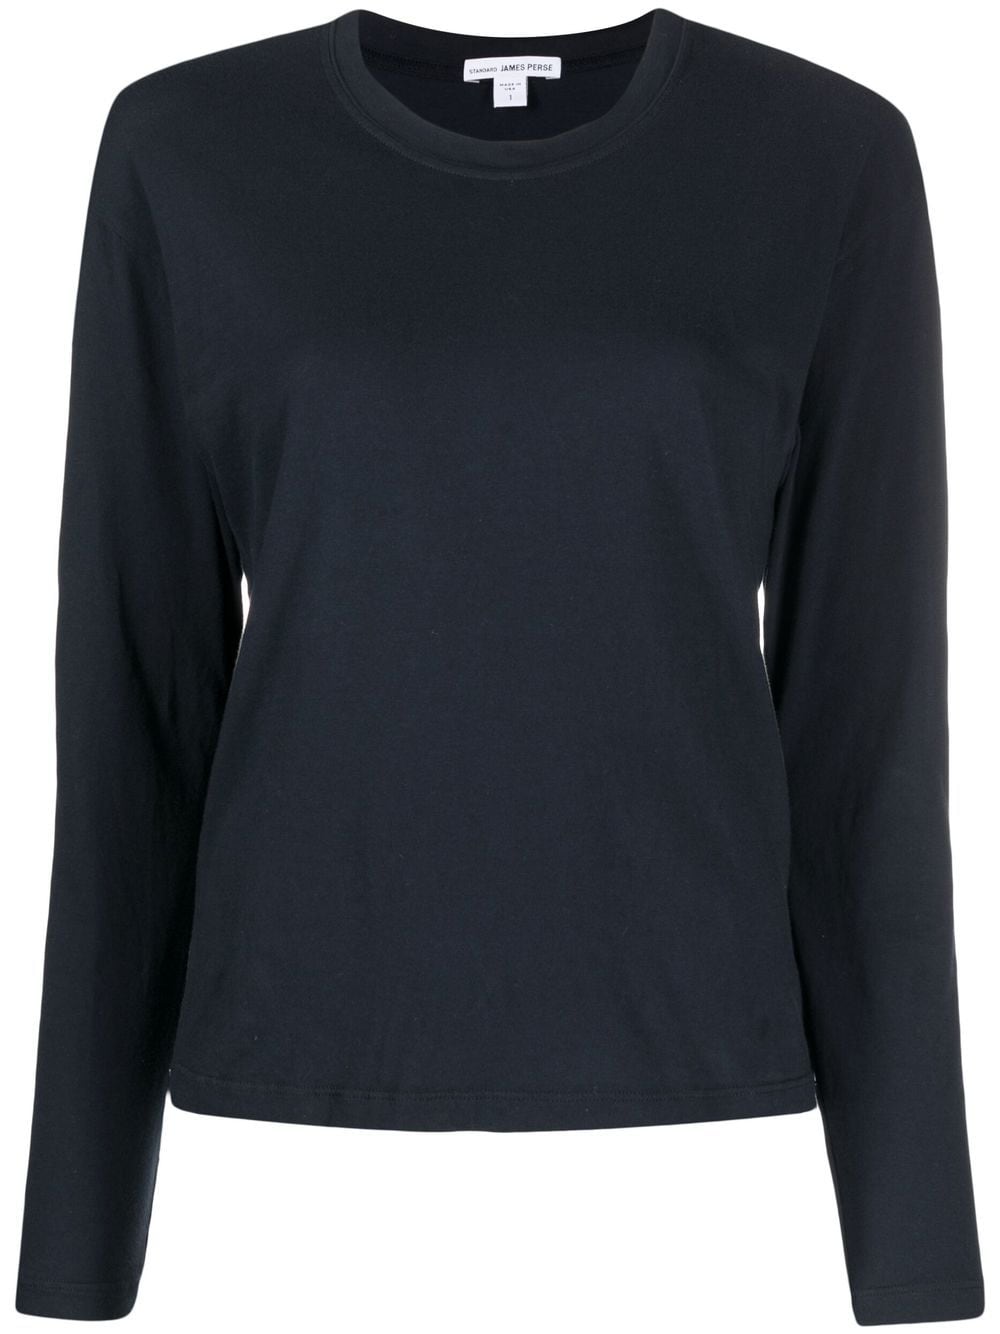 Image 1 of James Perse long-sleeve round-neckT-shirt